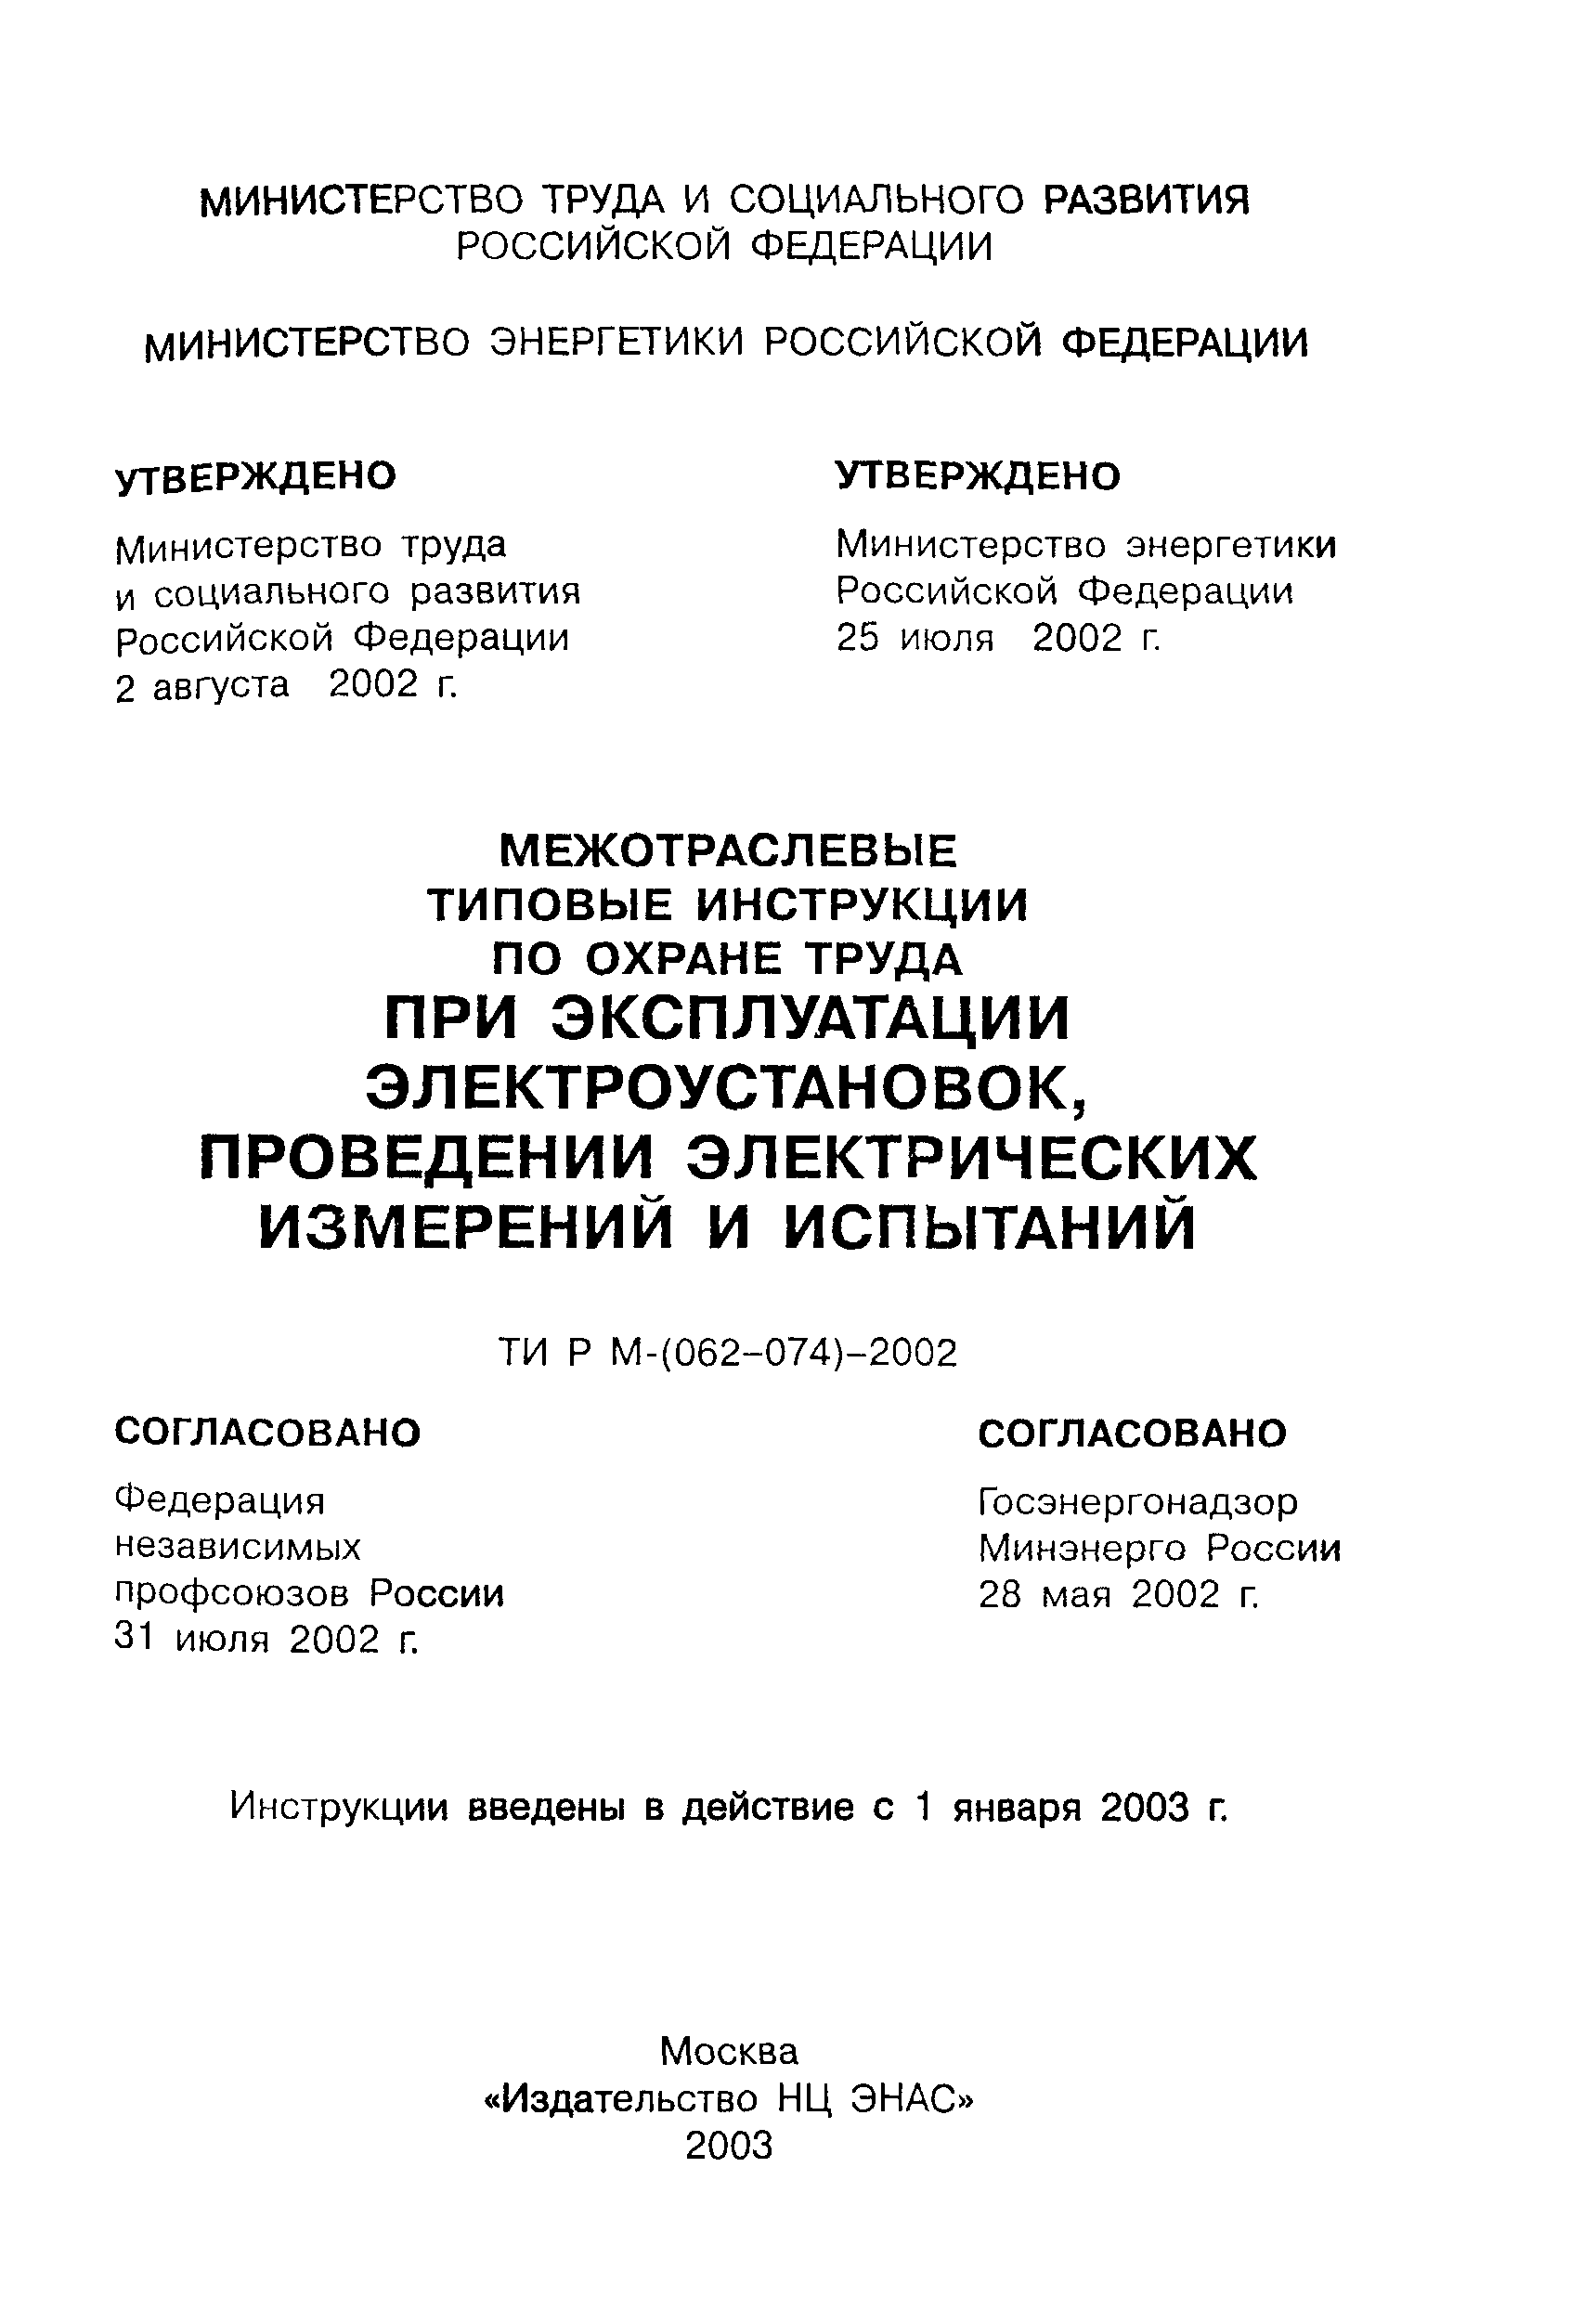 ТИ Р М-073-2002